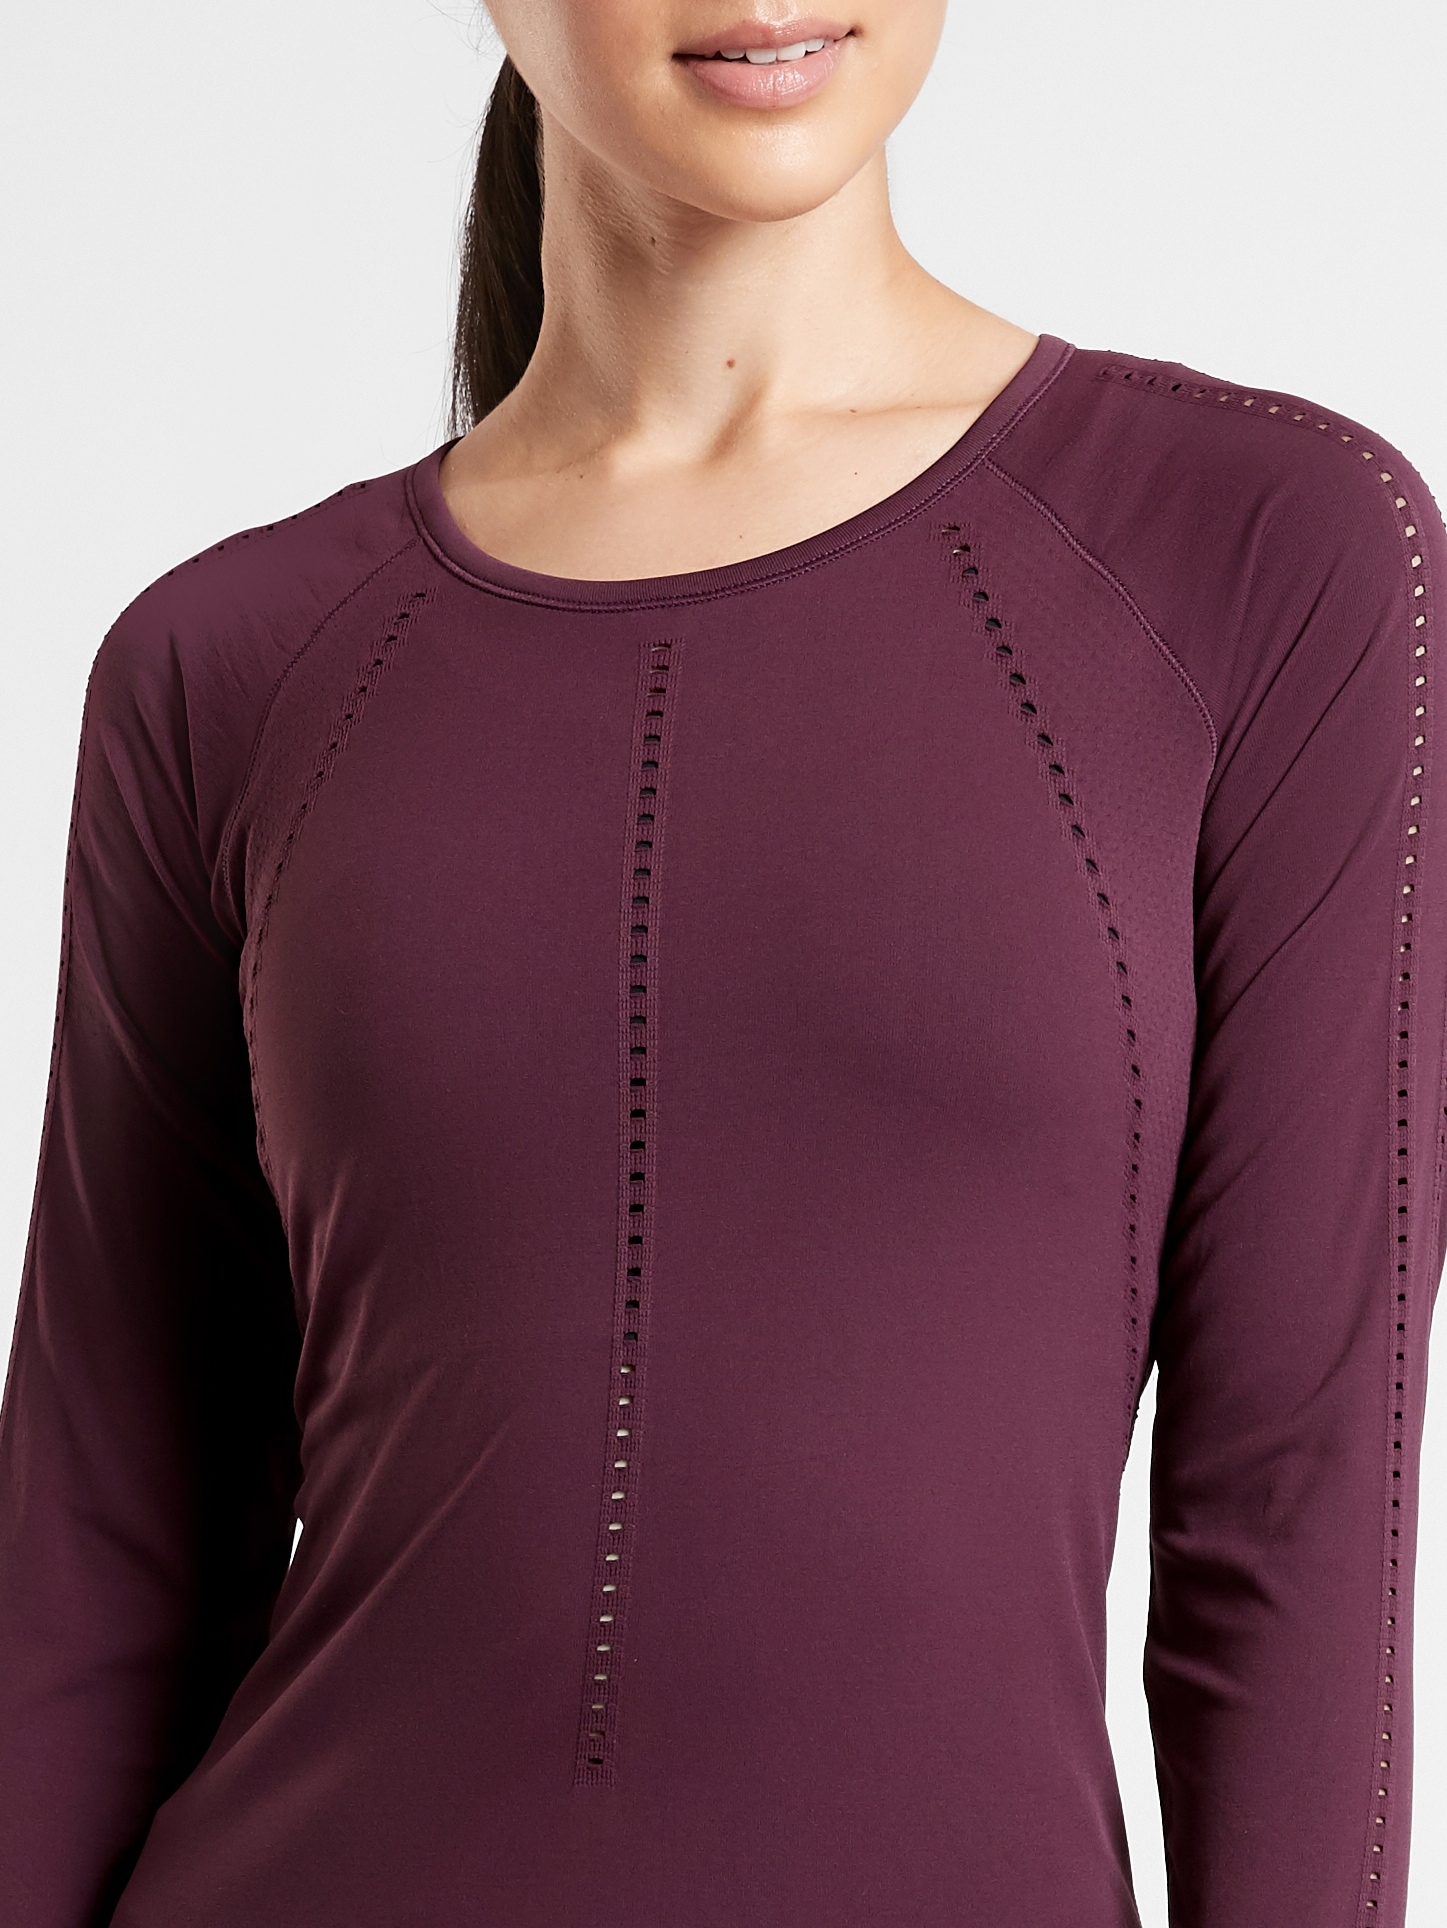 NWT Athleta Foothill Long Sleeve Top BLACK SIZE S           #211280 N0221